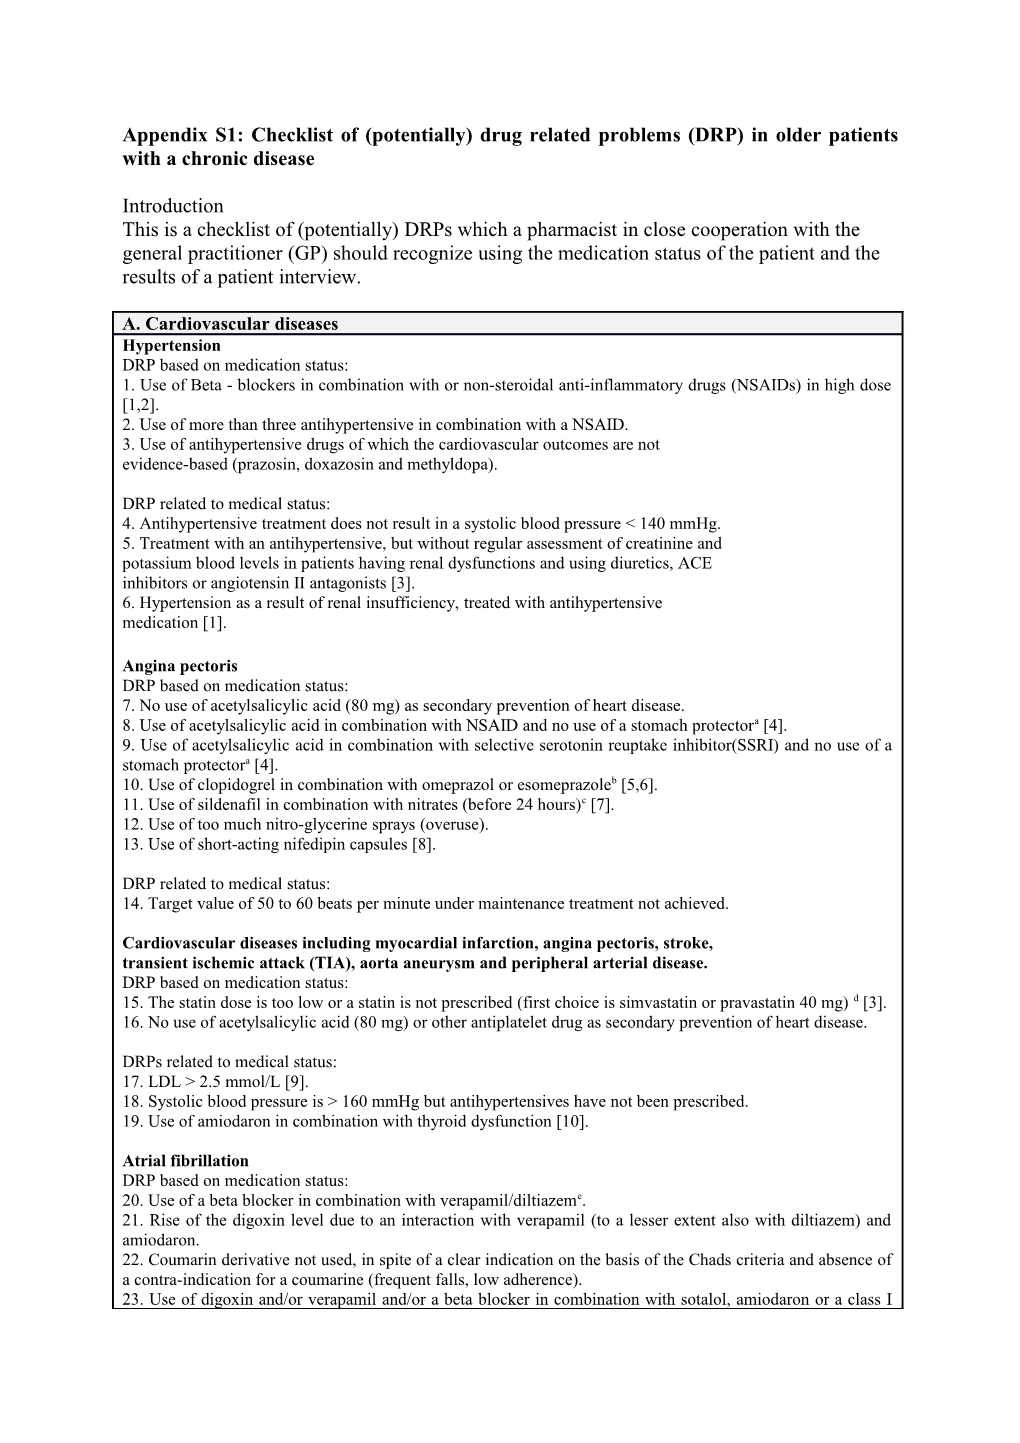 Appendix S1: Checklist of (Potentially) Drug Related Problems (DRP) in Older Patients